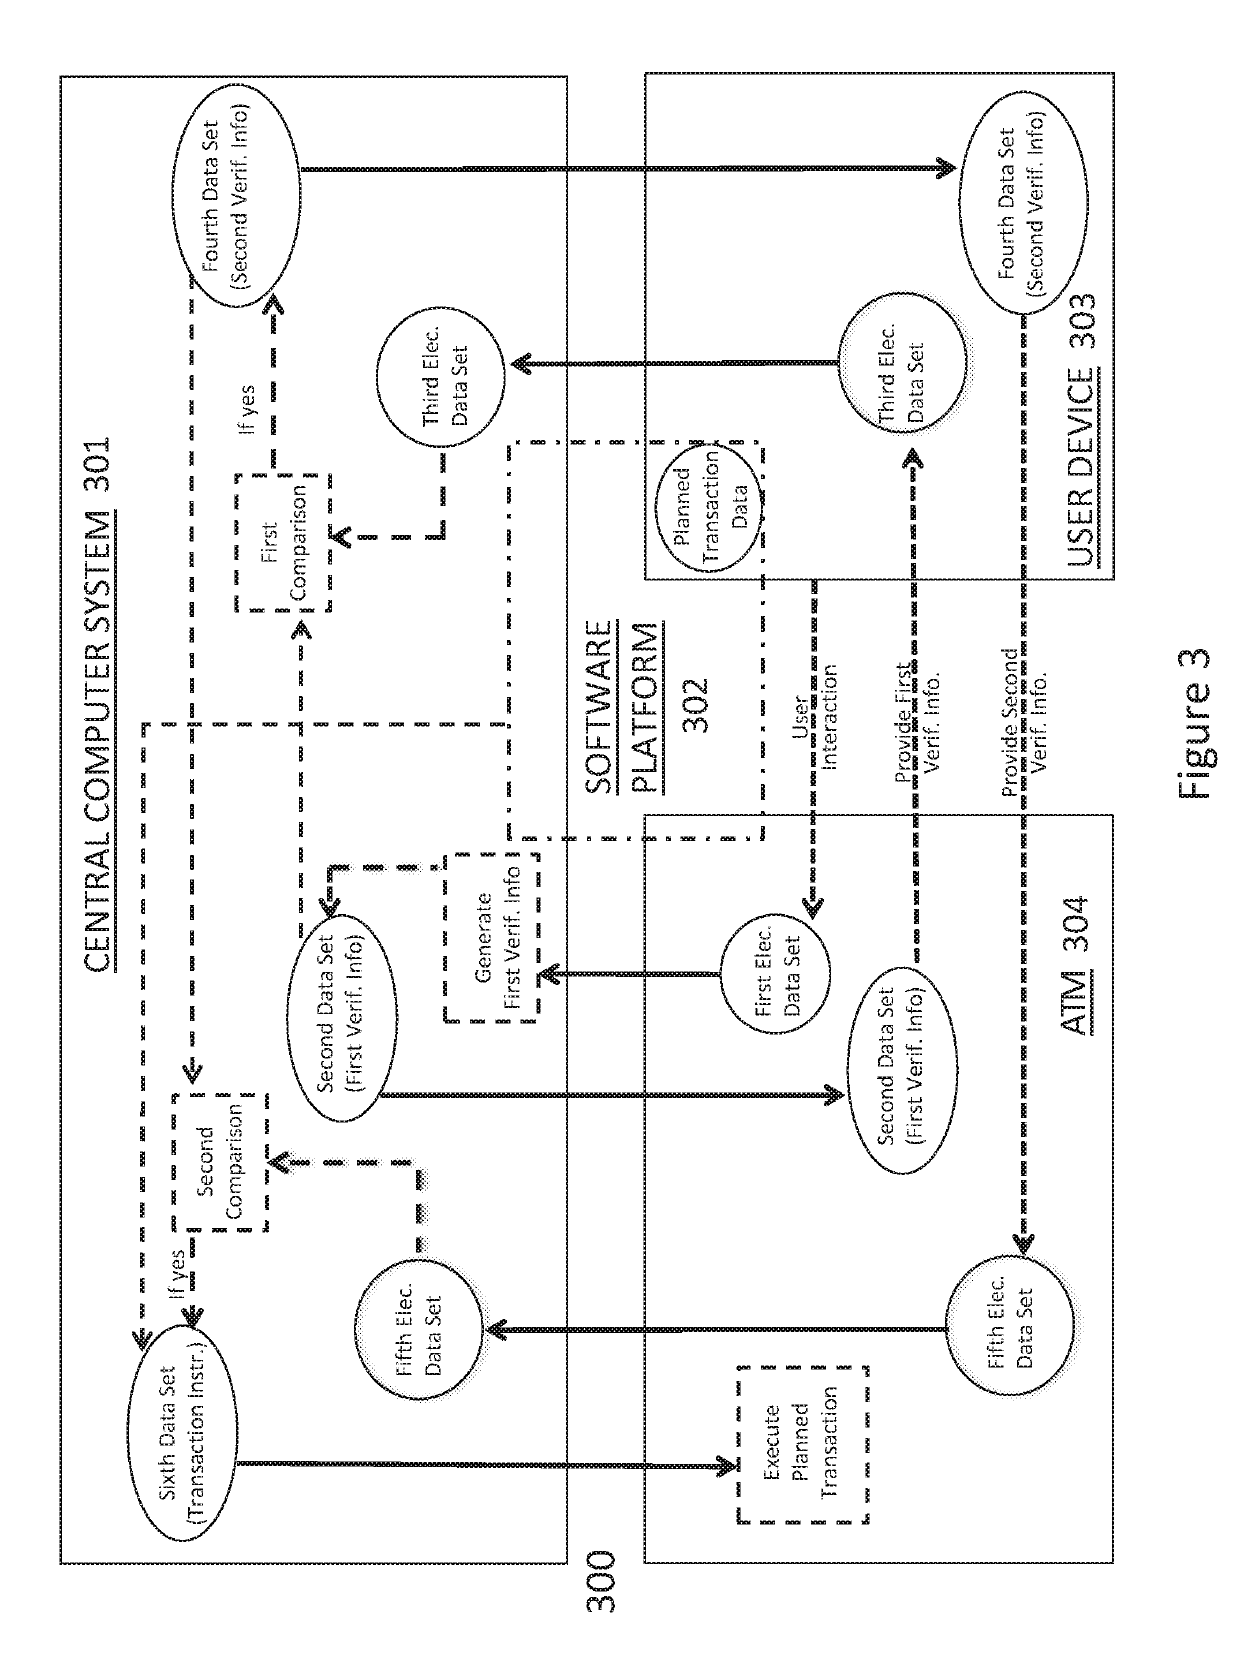 Enhanced automated teller machine, system and method for securely enabling a financial transaction at the automated teller machine